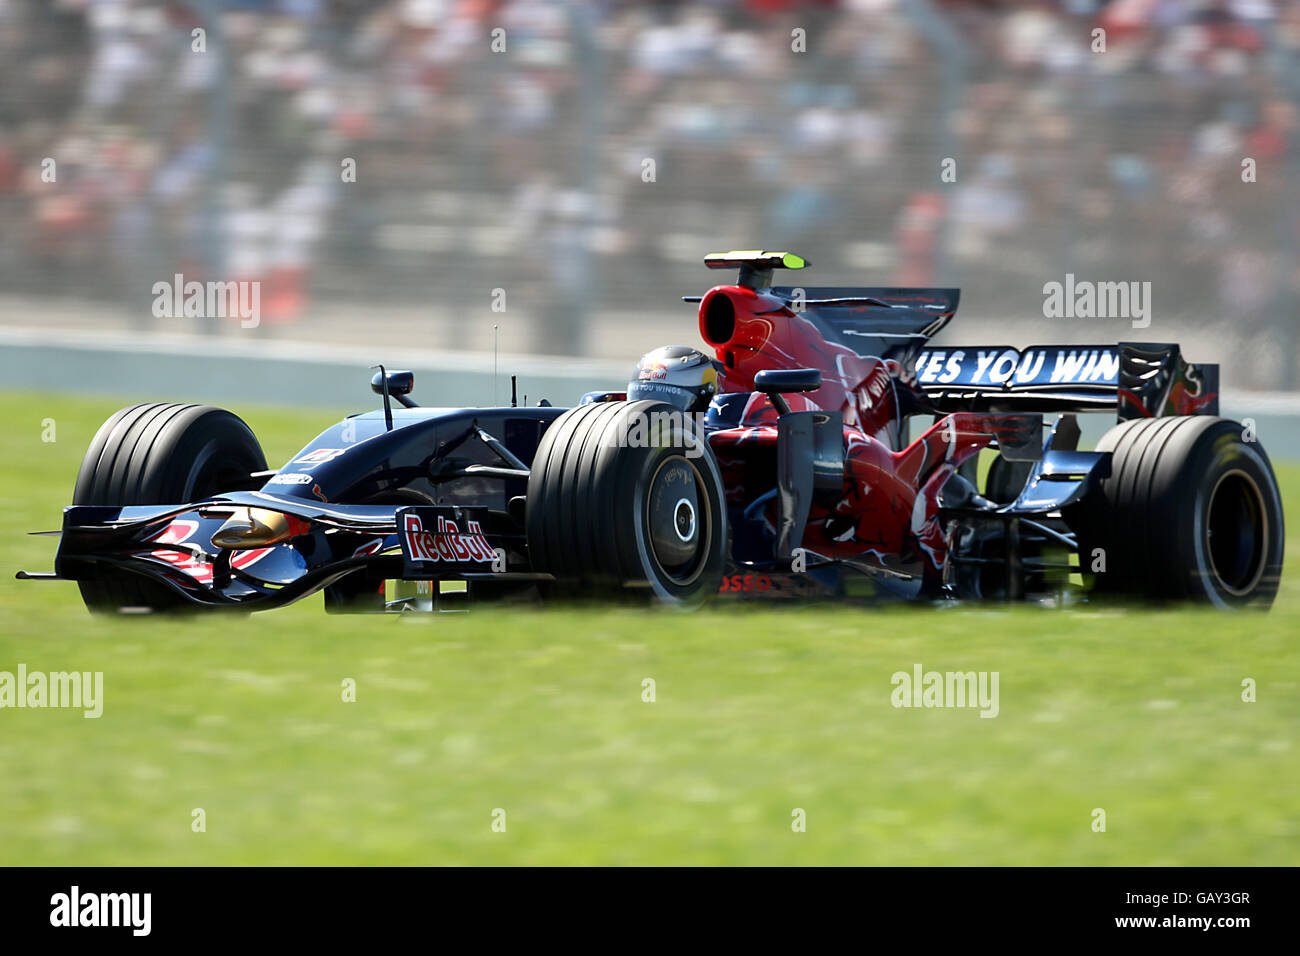 Toro Rosso's Sebastian Vettel during qualifying for the Grand Prix at Magny-Cours, Nevers, France. Stock Photo